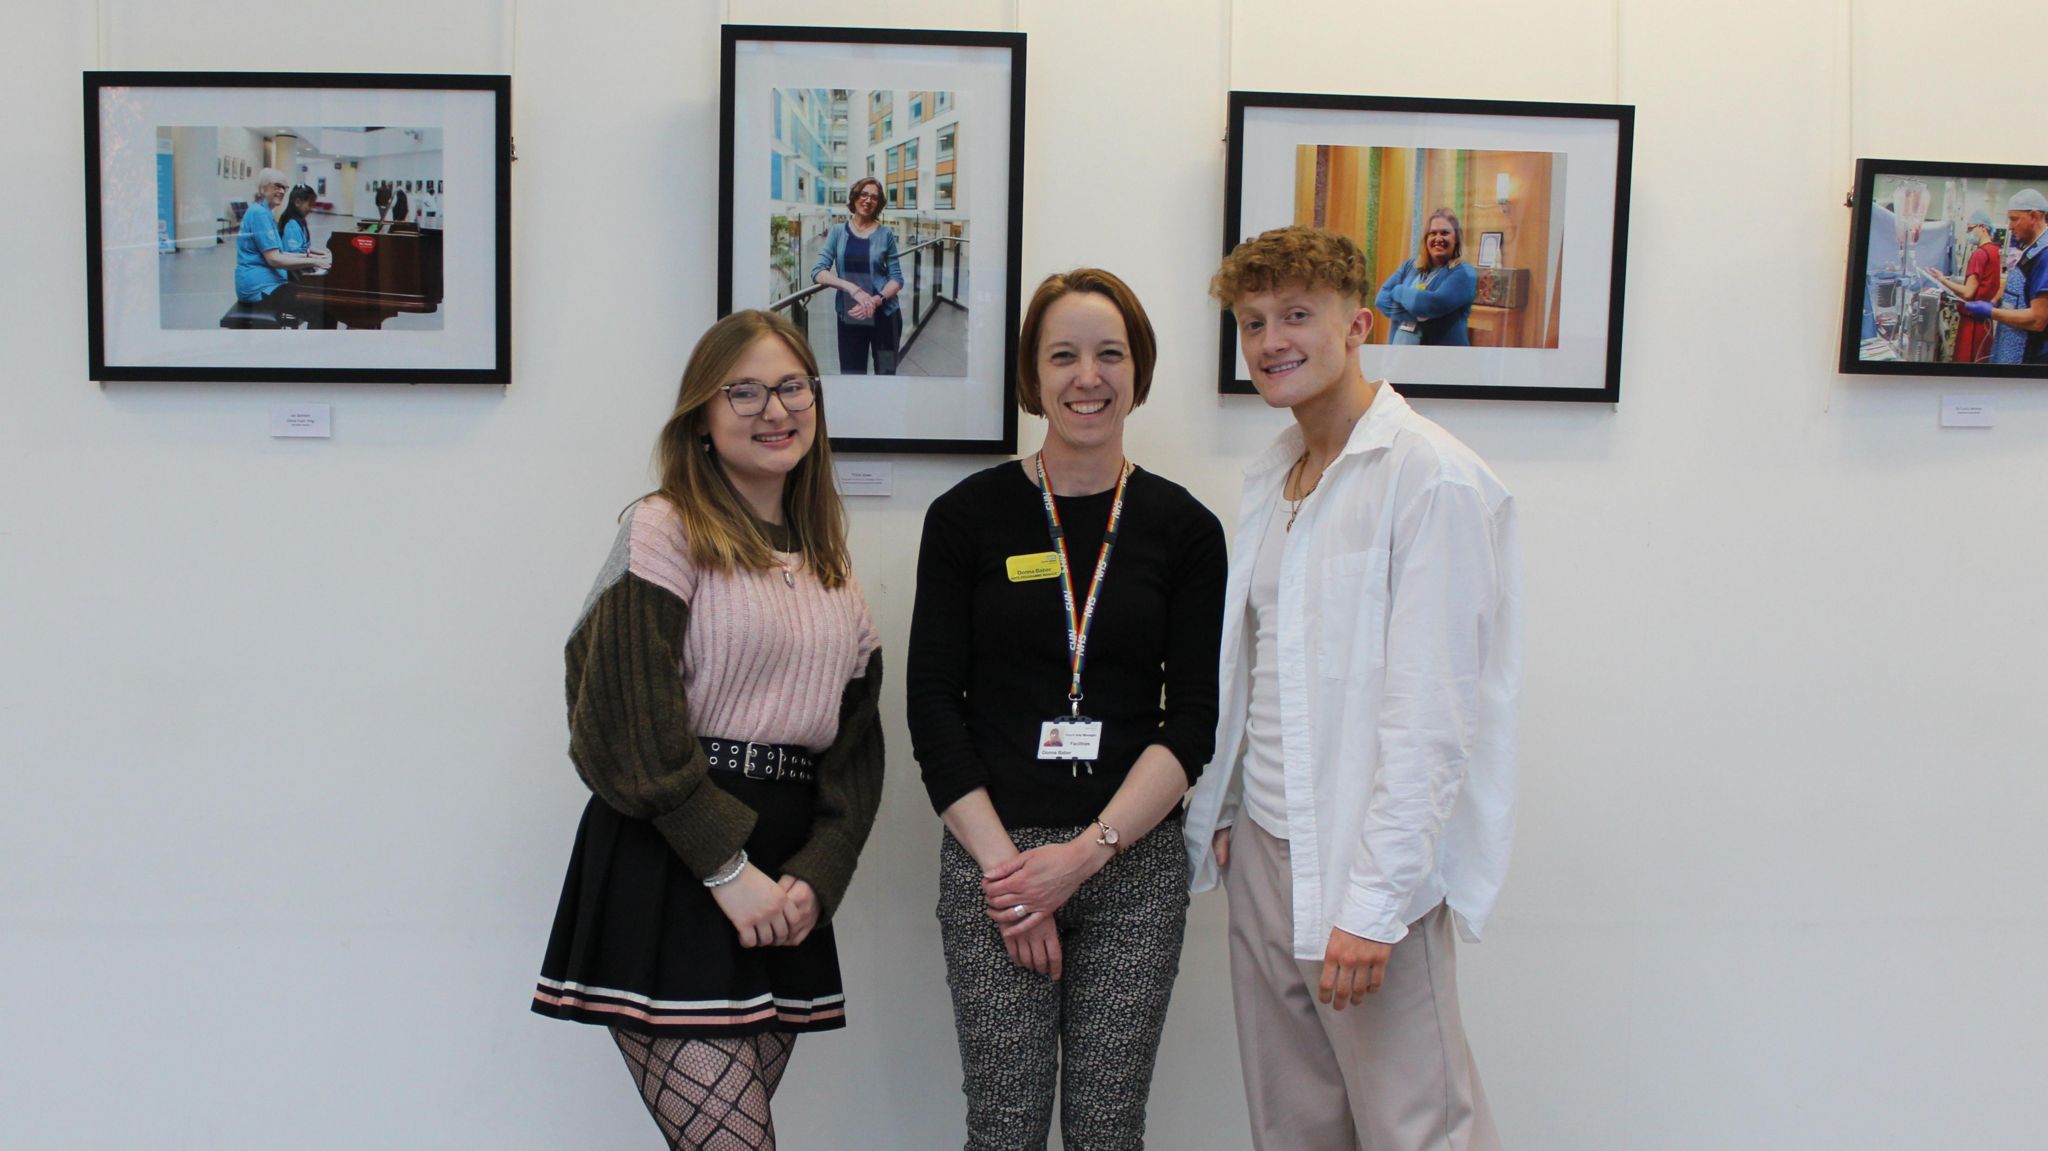 Carla, Donna and Kian standing beside their framed photographs at the exhibition